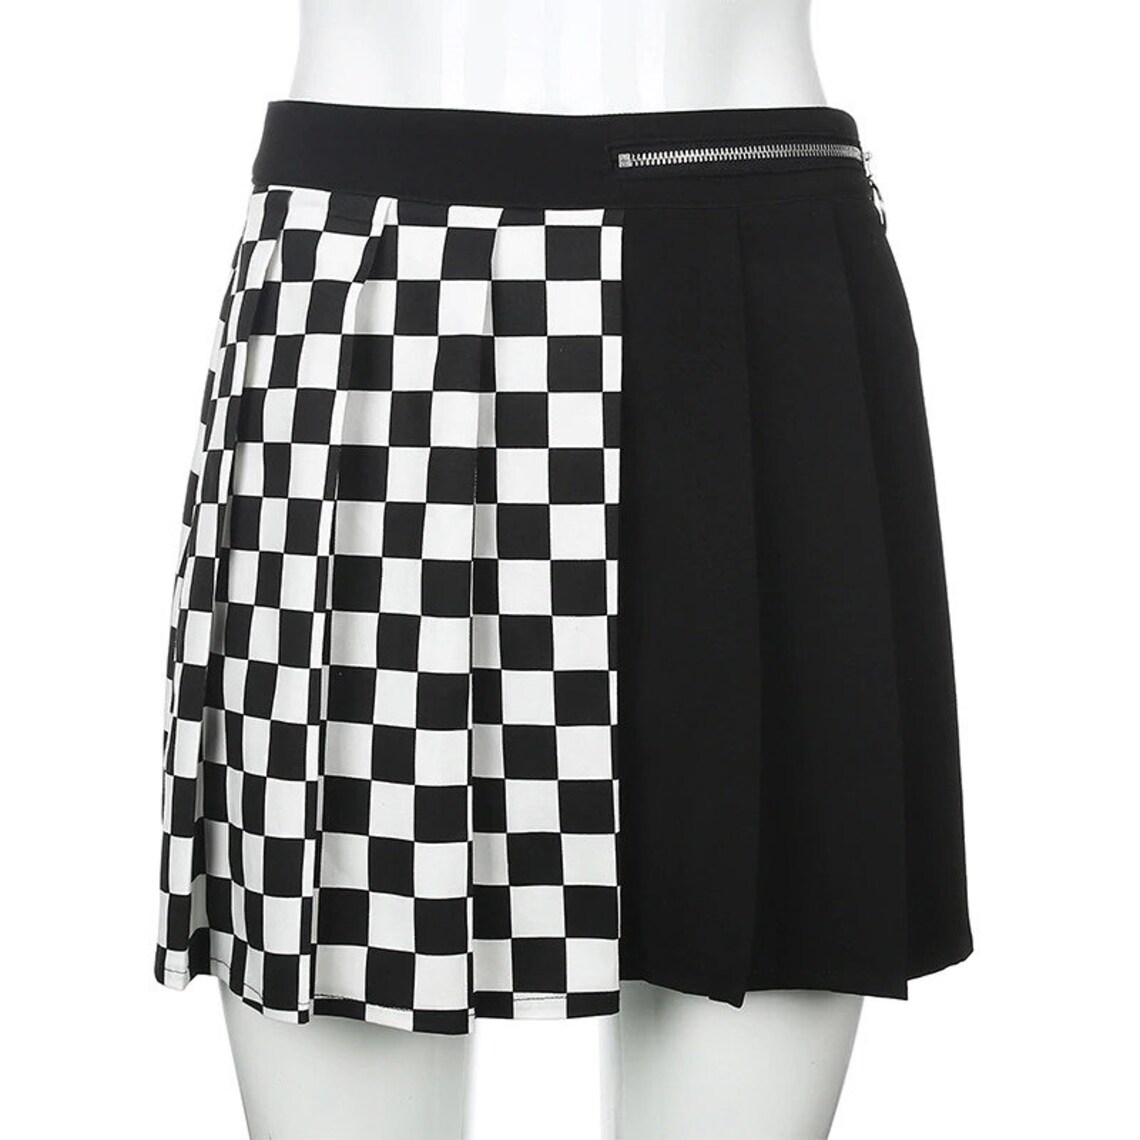 Checkered High Waisted Pleated Mini Skirt Punk / Goth Style | Etsy